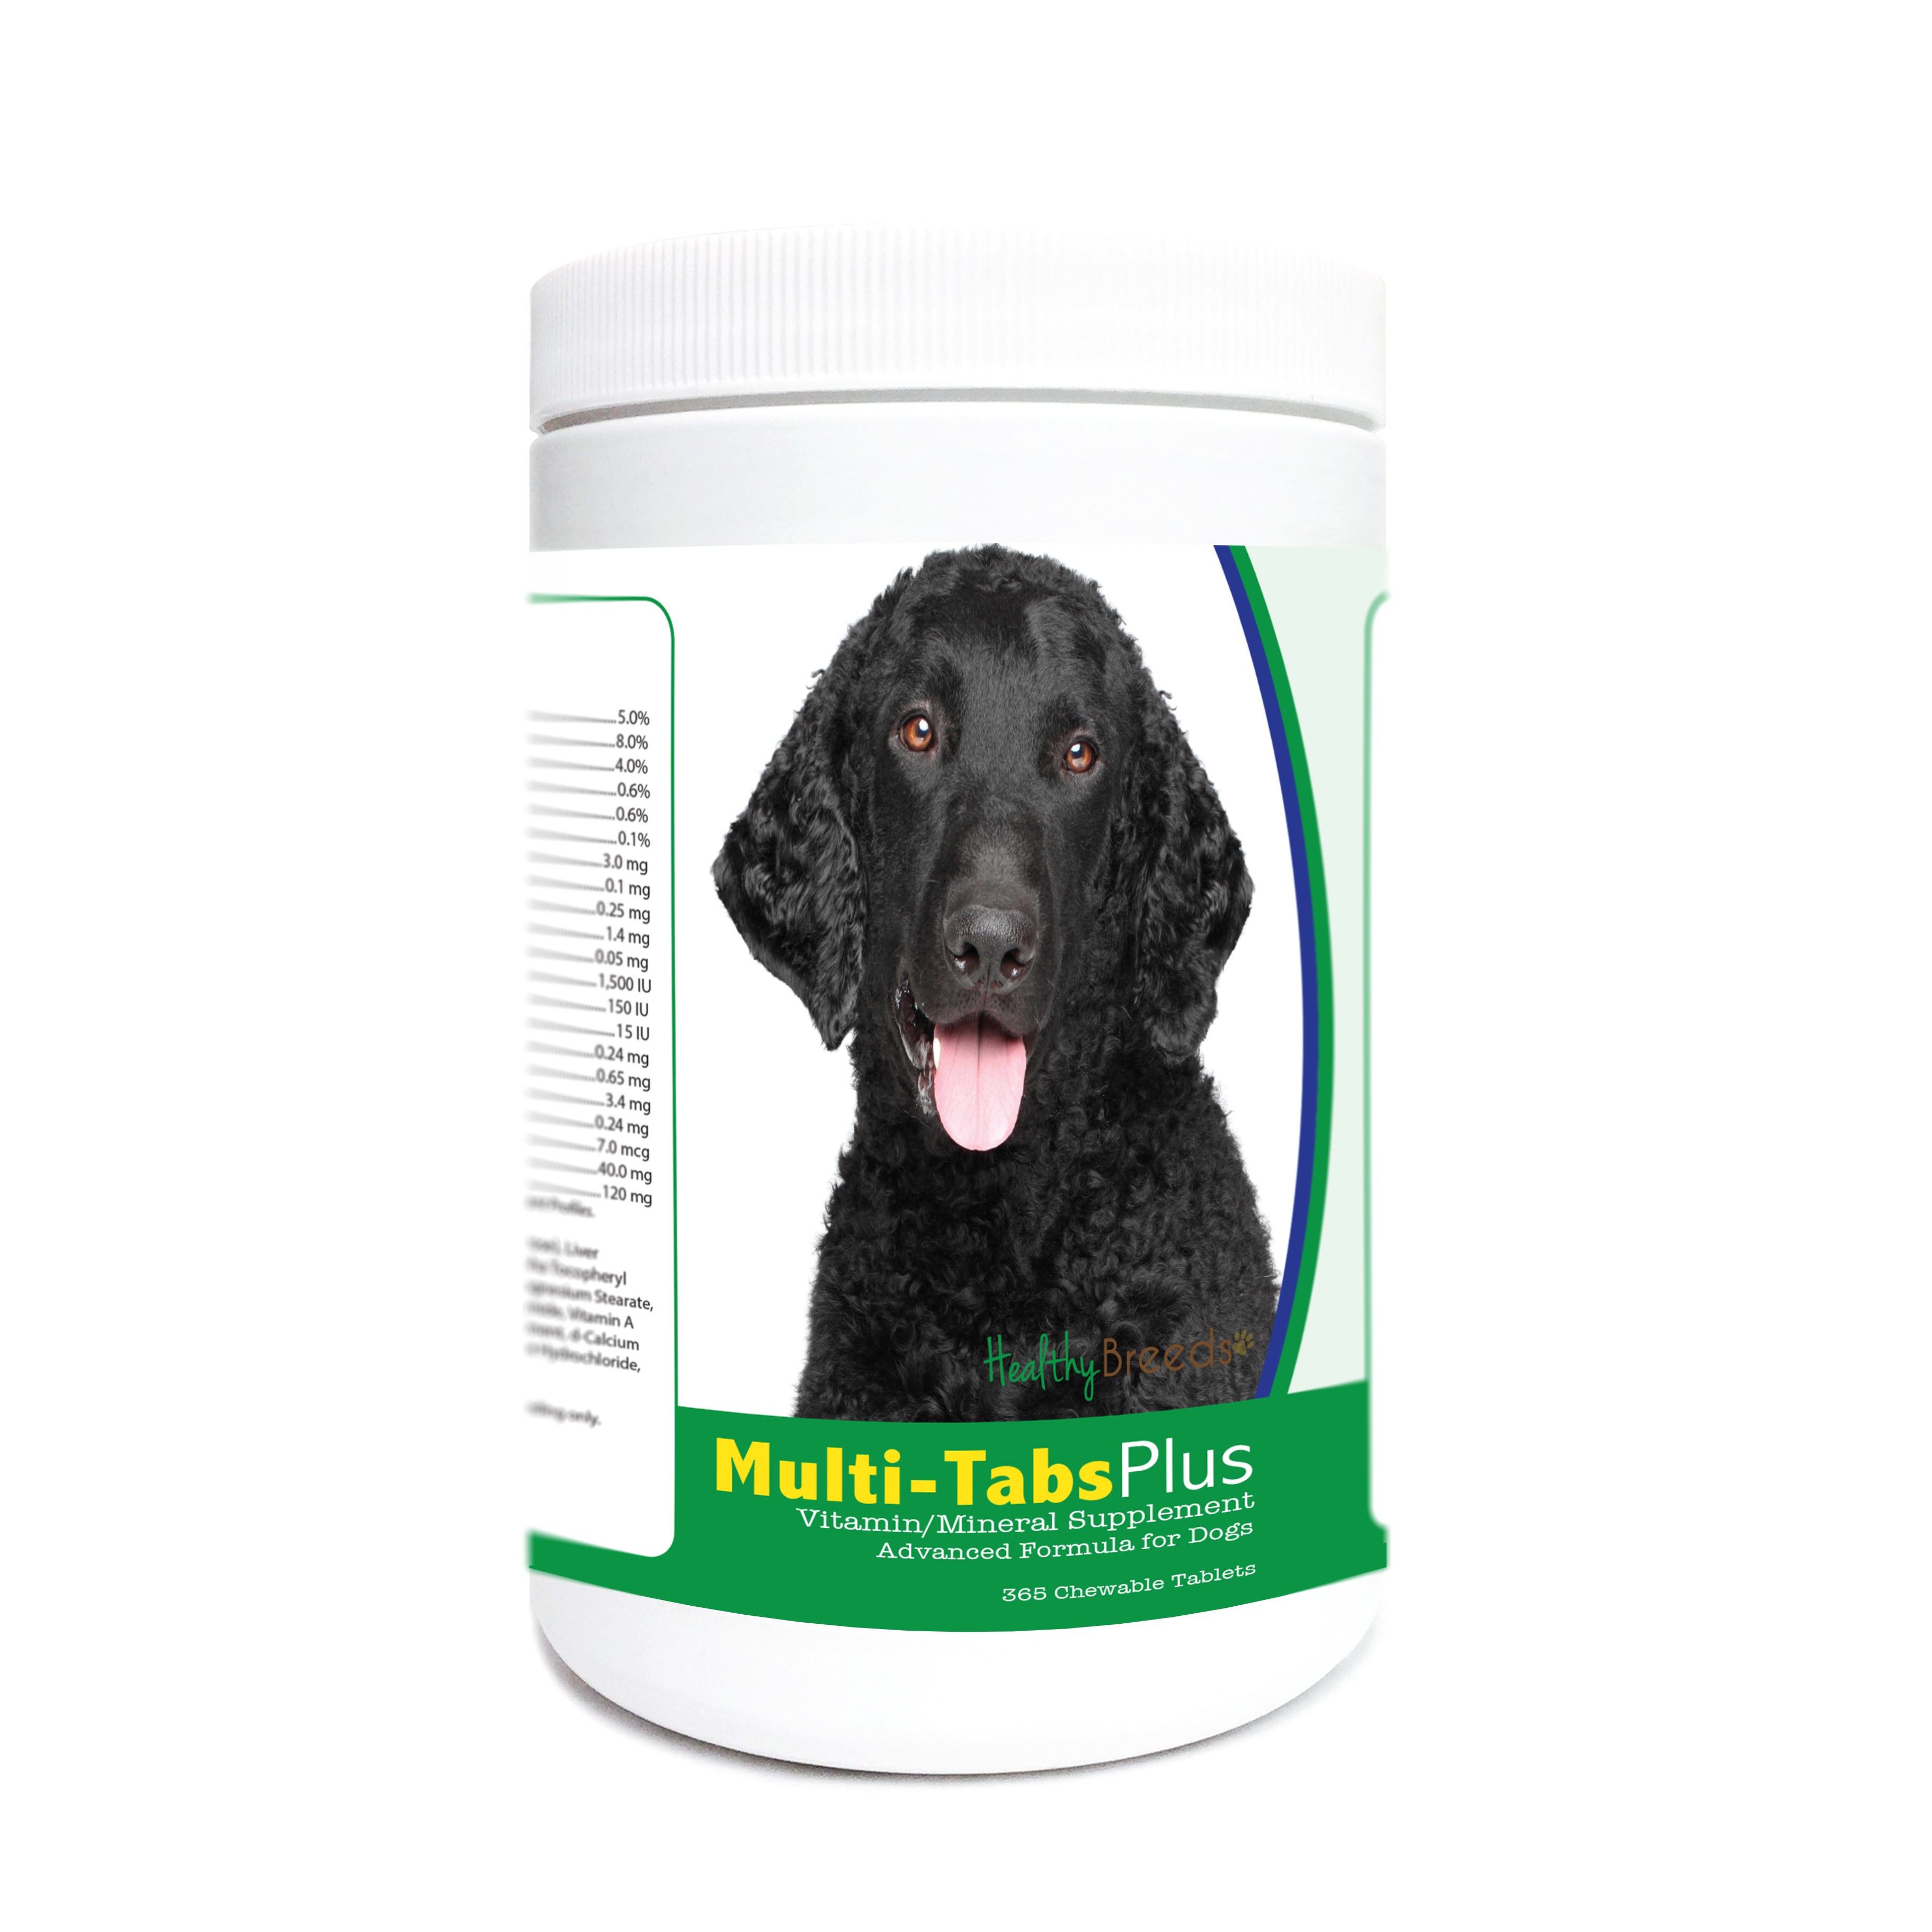 Curly-Coated Retriever Multi-Tabs Plus Chewable Tablets 365 Count